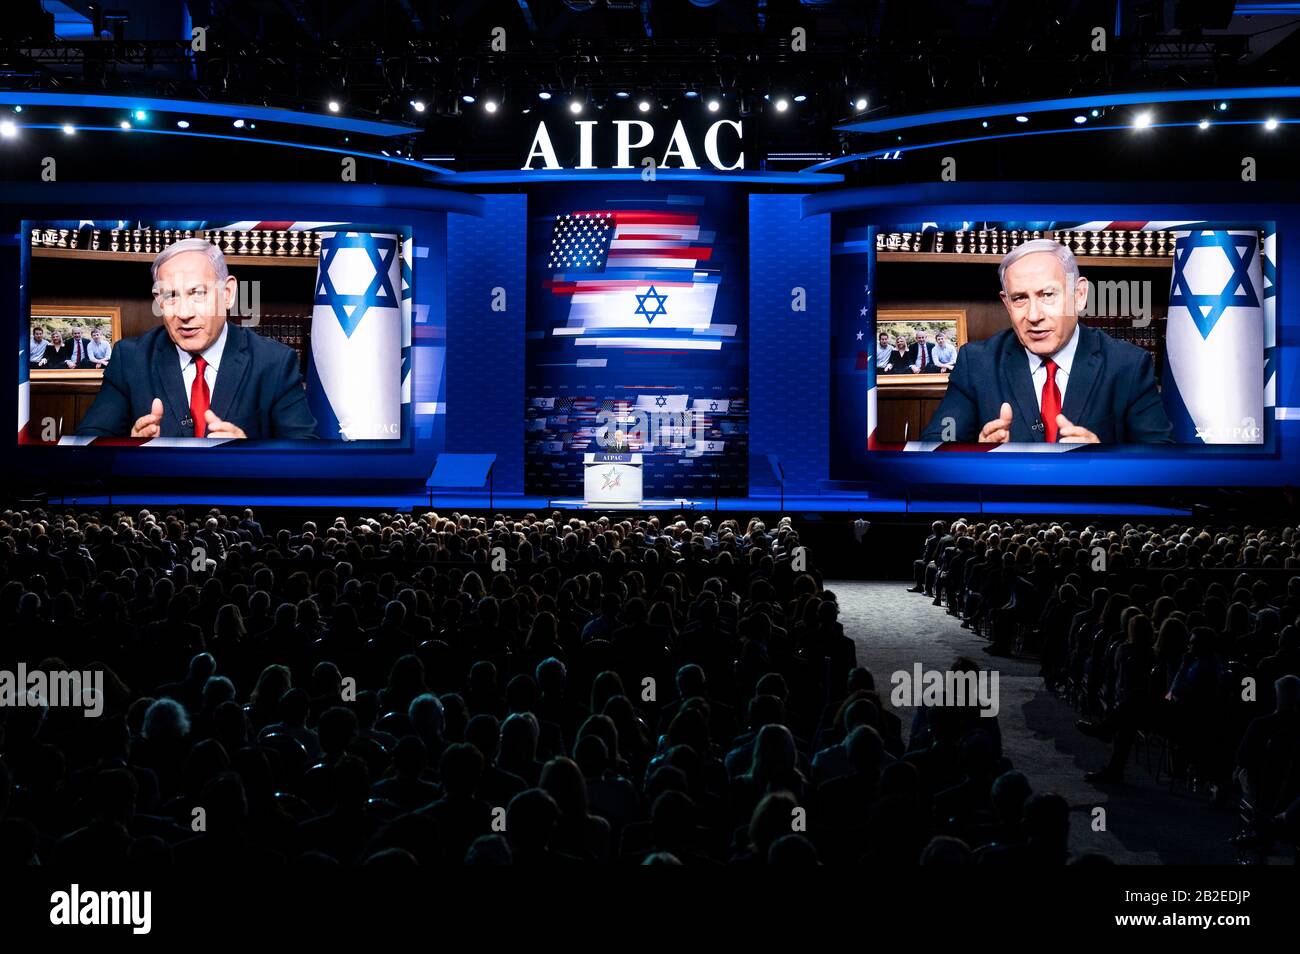 Washington, DC, USA. 1st Mar, 2020. March 1, 2020 - Washington, DC, United States: BENJAMIN NETANYAHU, Prime Minister of Israel, speaking live via video at the American Israel Public Affairs Committee Policy Conference. Credit: Michael Brochstein/ZUMA Wire/Alamy Live News Stock Photo